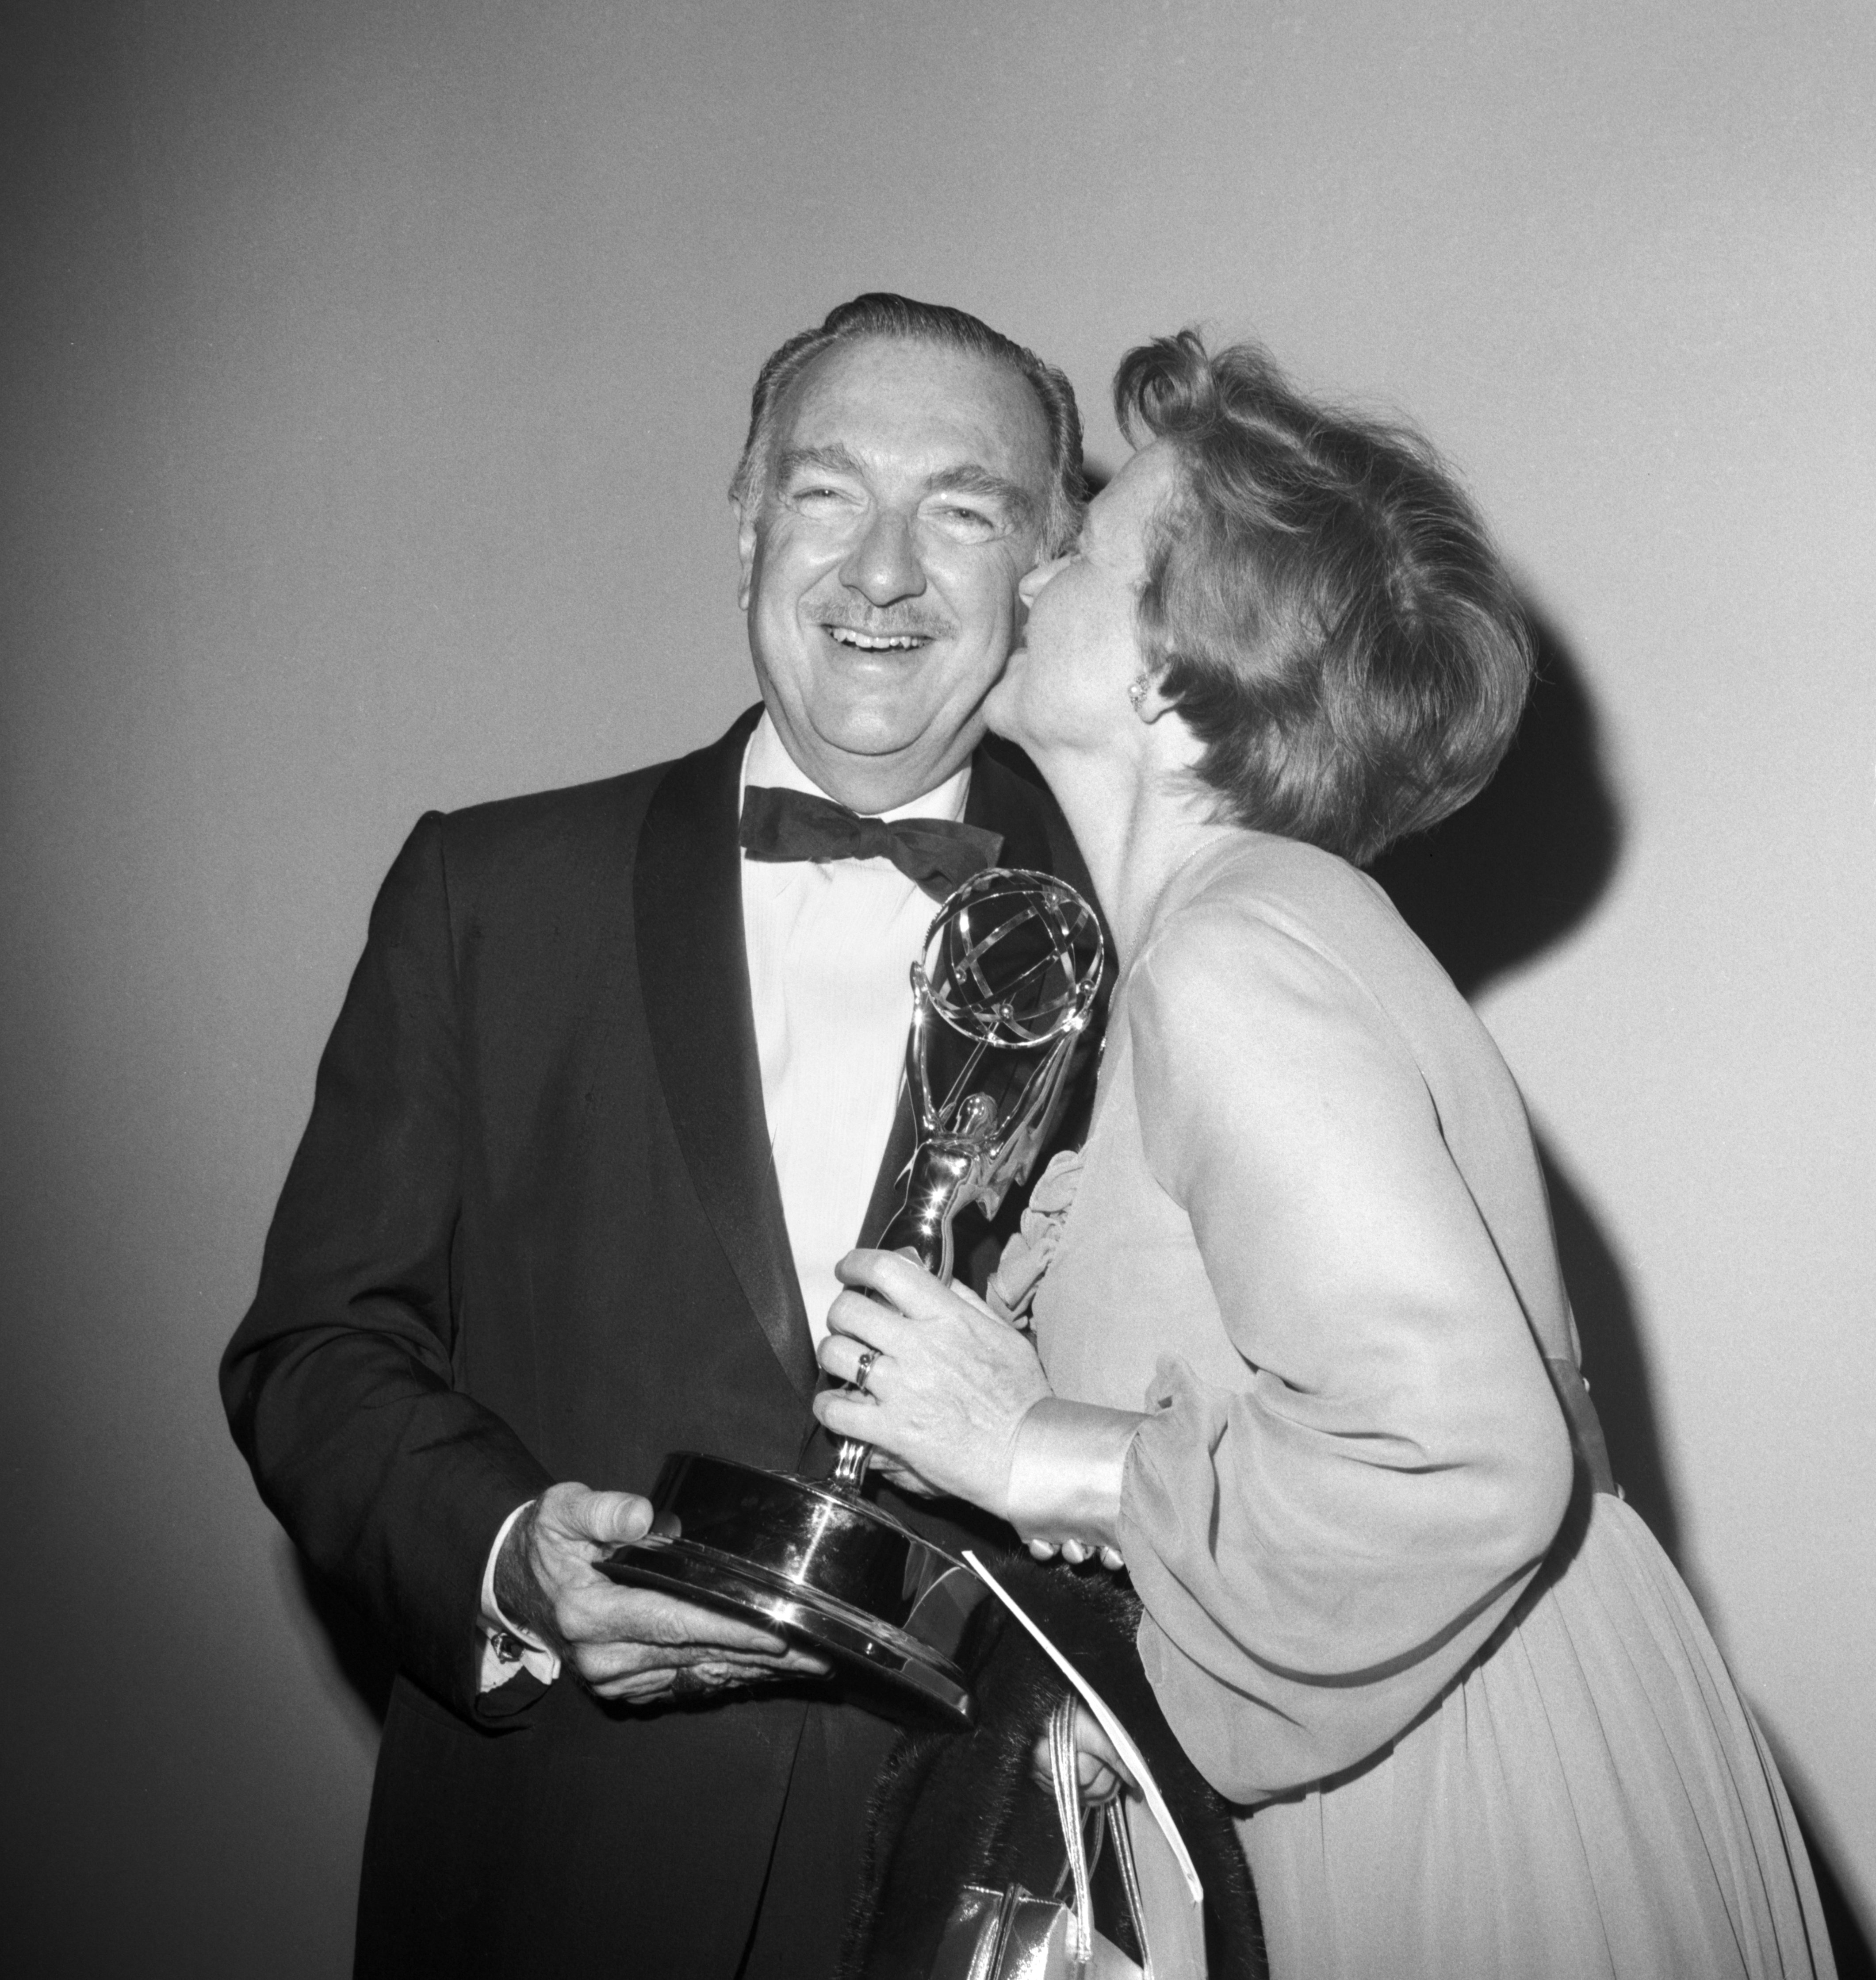 The 22nd Annual EMMY Awards, broadcast from Carnegie Hall, New York, NY. Image dated June 7, 1970. Walter Cronkite, Emmy winner for his CBS News commentary, Man on the Moon: The Epic Journey of Apollo XI, and his wife, Betsy. | Source: Getty Images